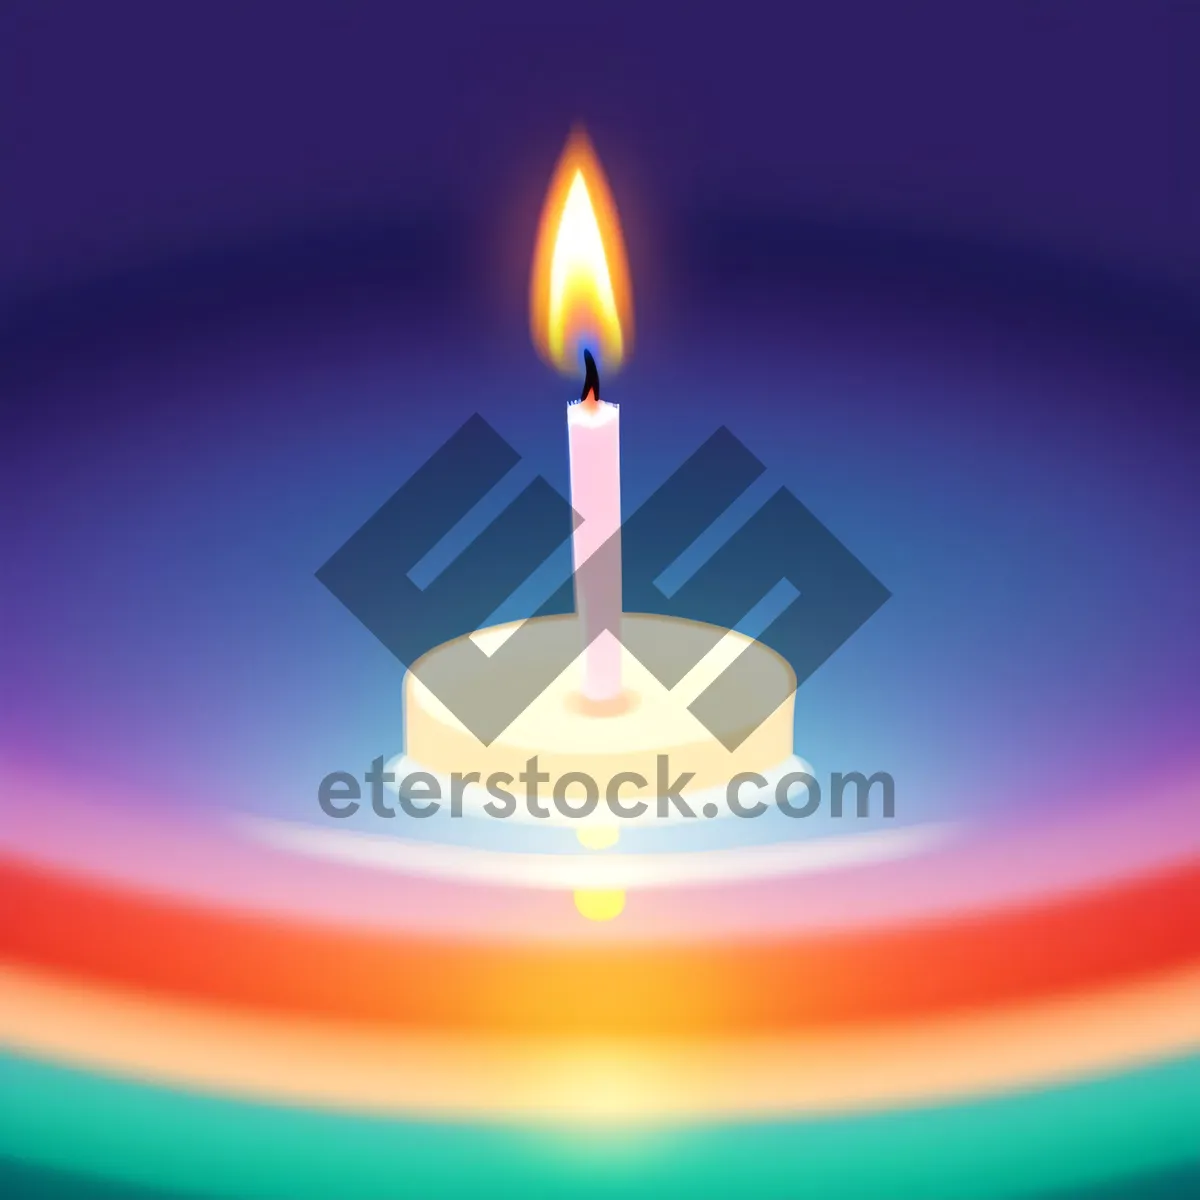 Picture of Shiny Candle Flame Icon - Wax Heat Light